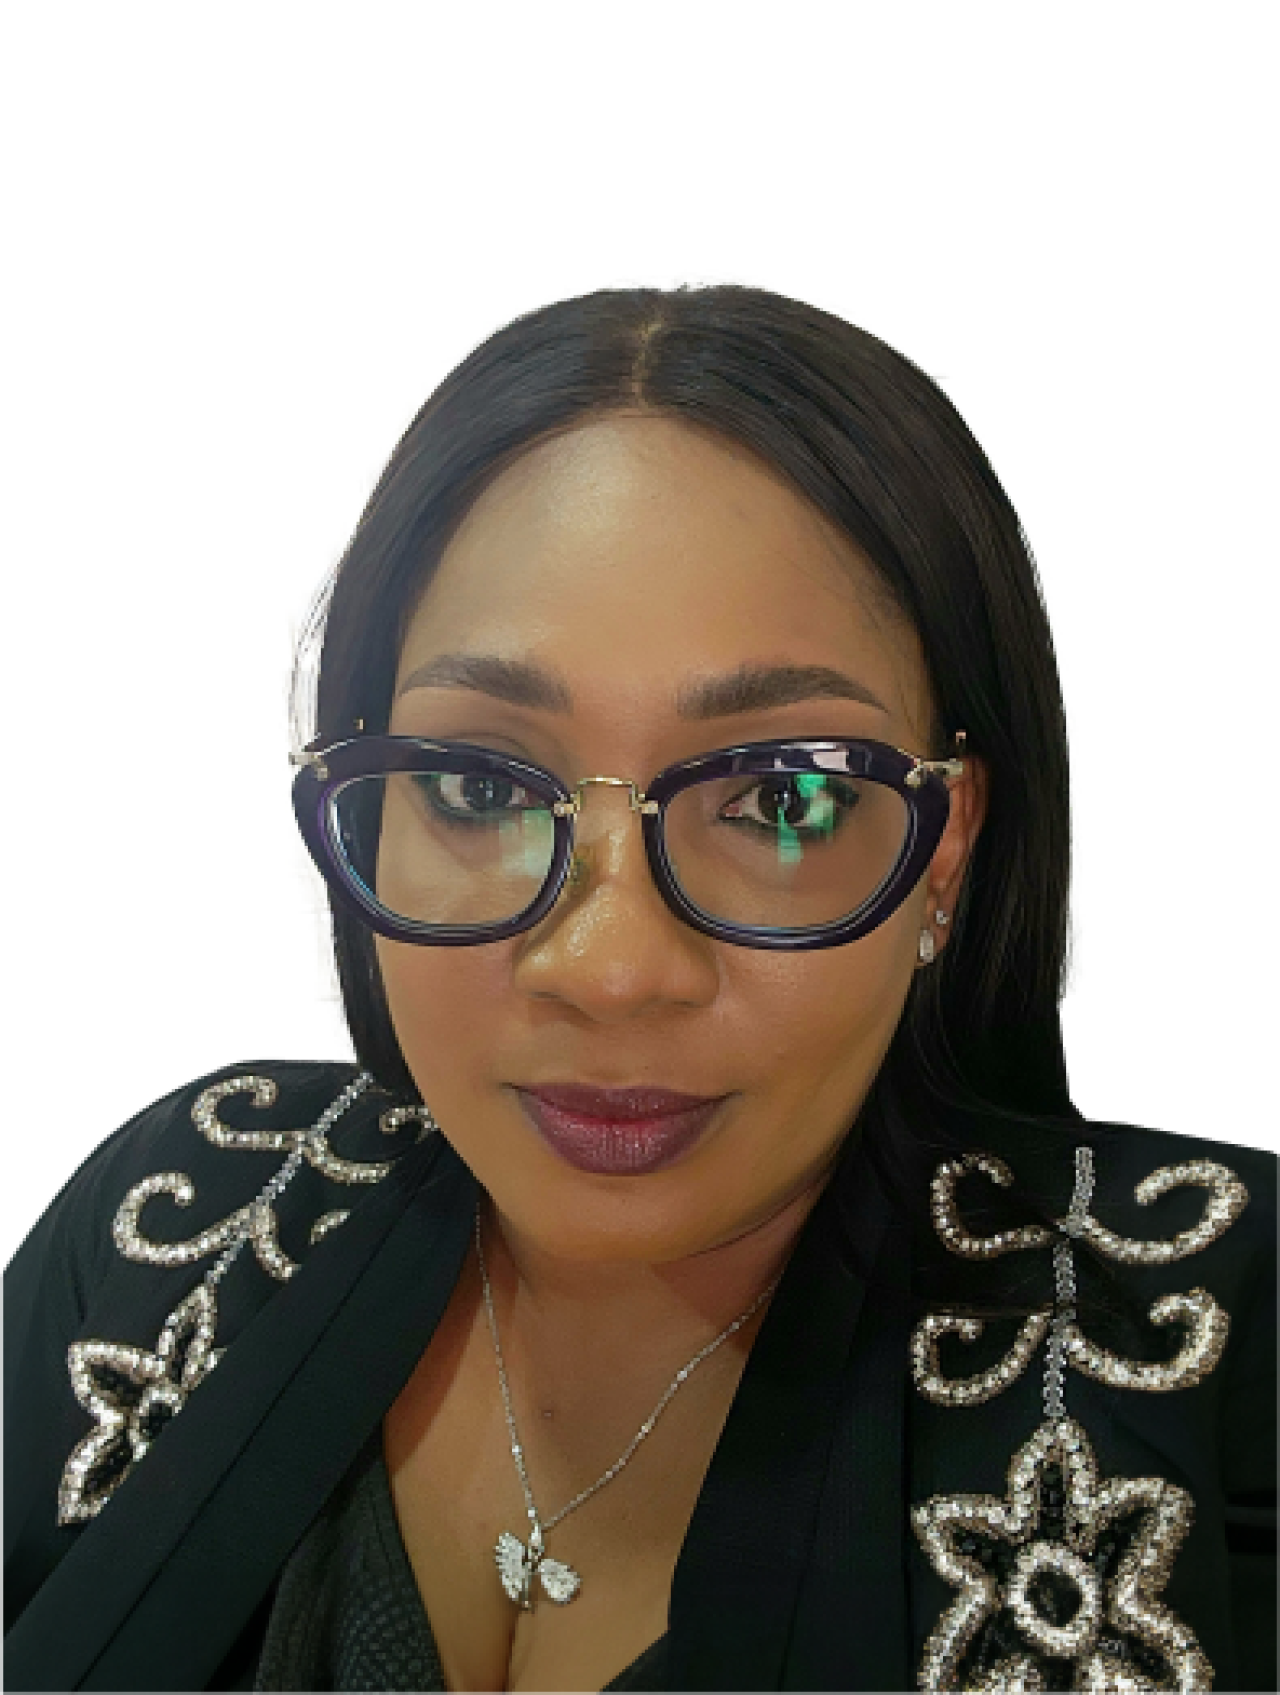 Adaeze Aidenagbon
Project Director, Nigeria
Adaeze currently serves as the Pro...